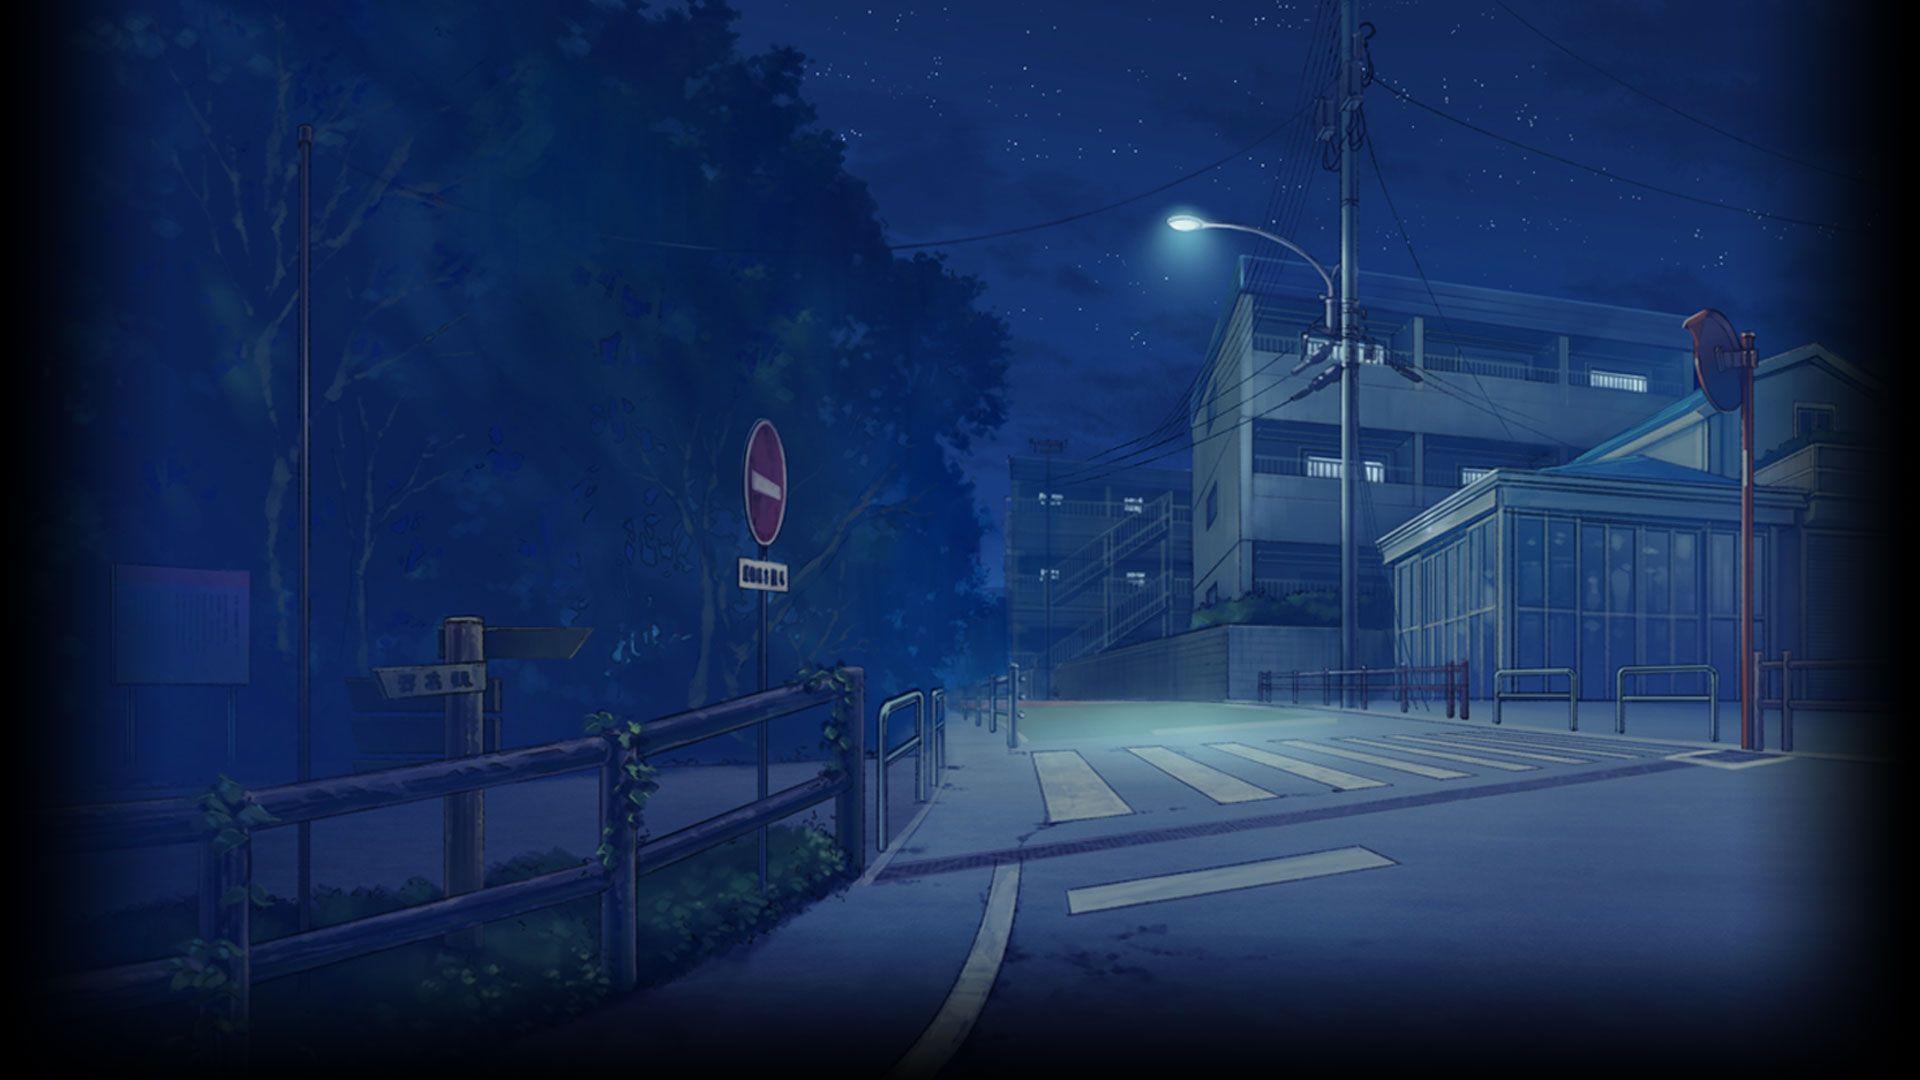 [Download 15+] 41+ Background Anime Night Street Images PNG